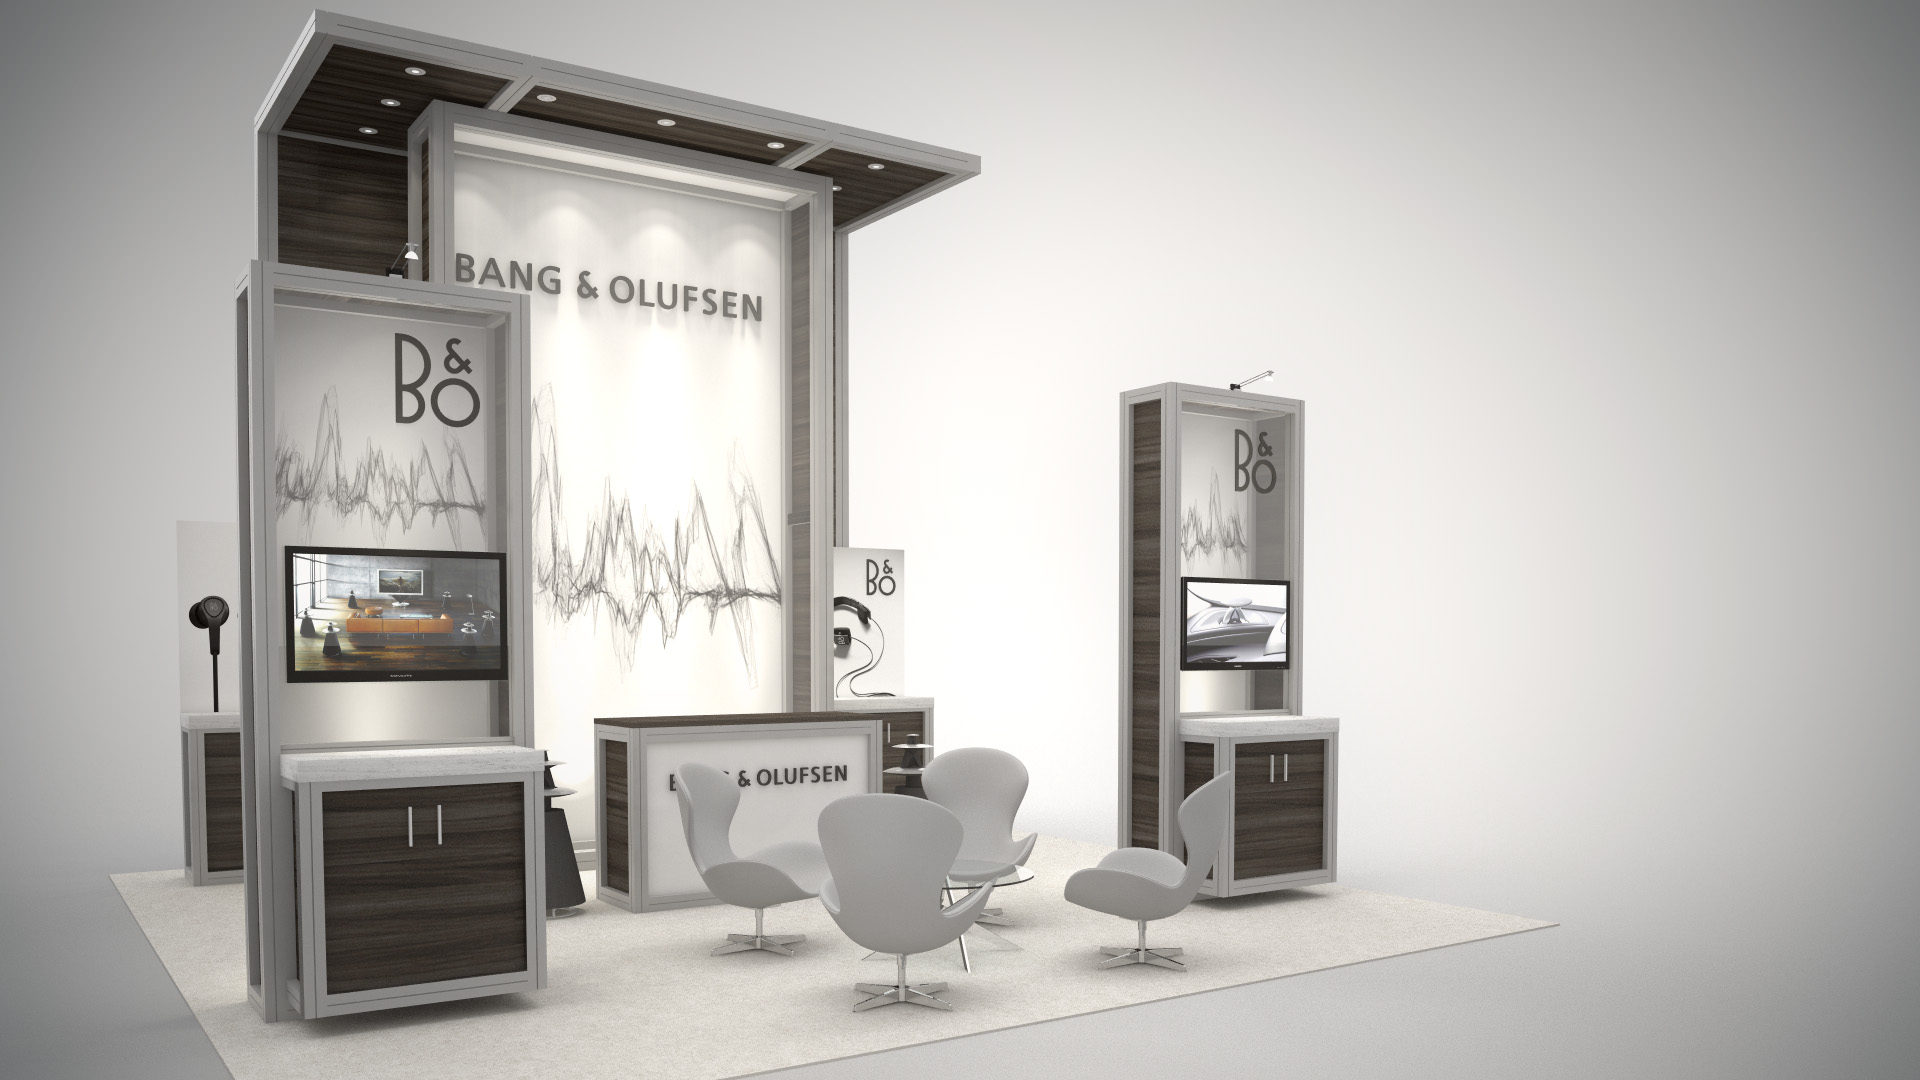 Custom designed trade show rental exhibit display with modular workstations and integrated monitors